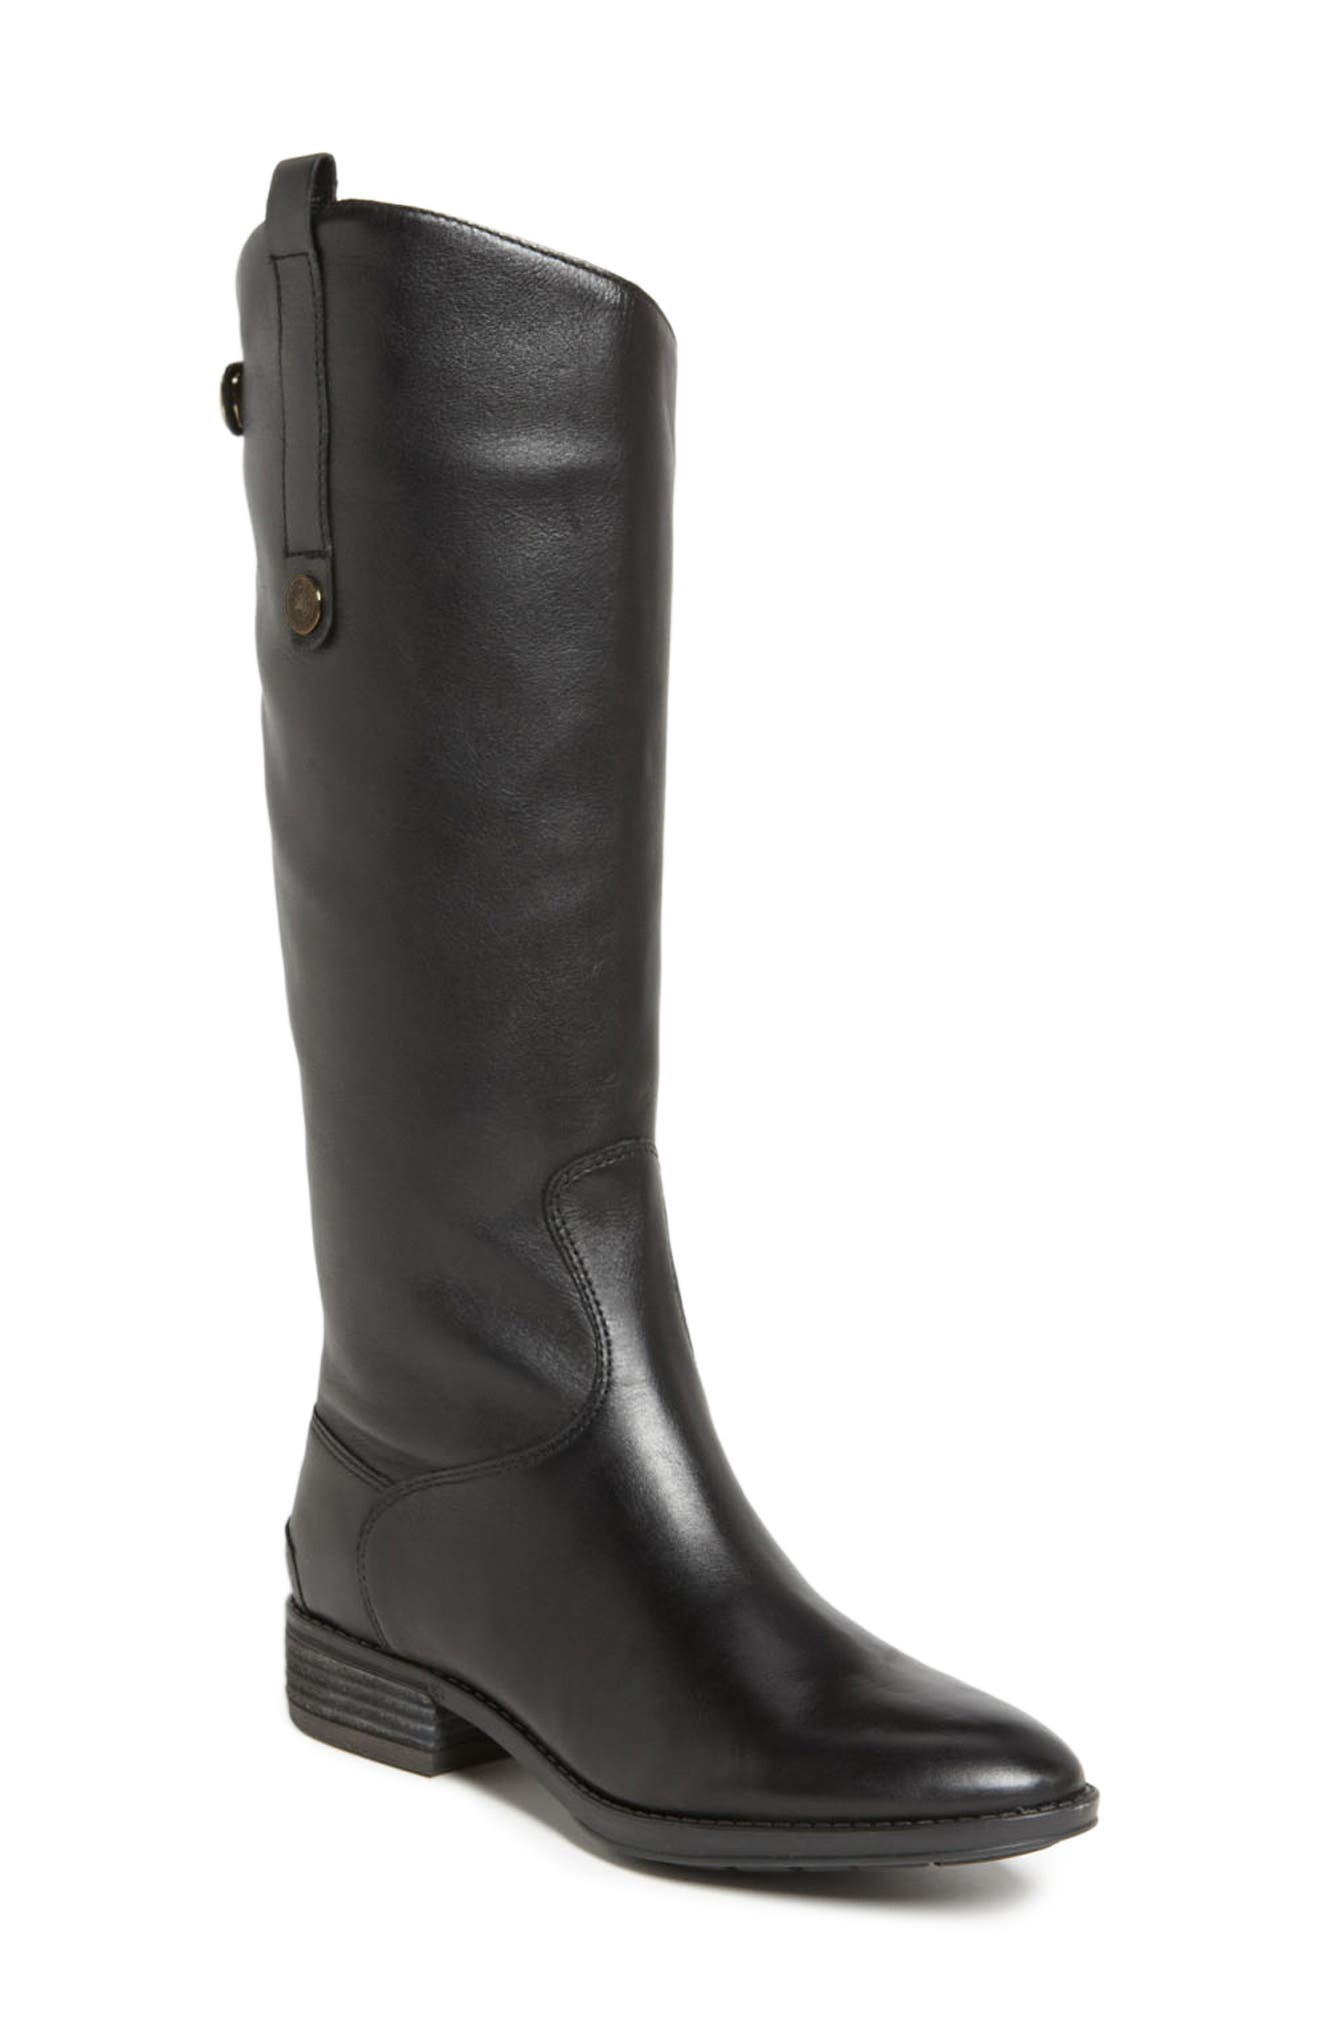 nordstrom black tall boots